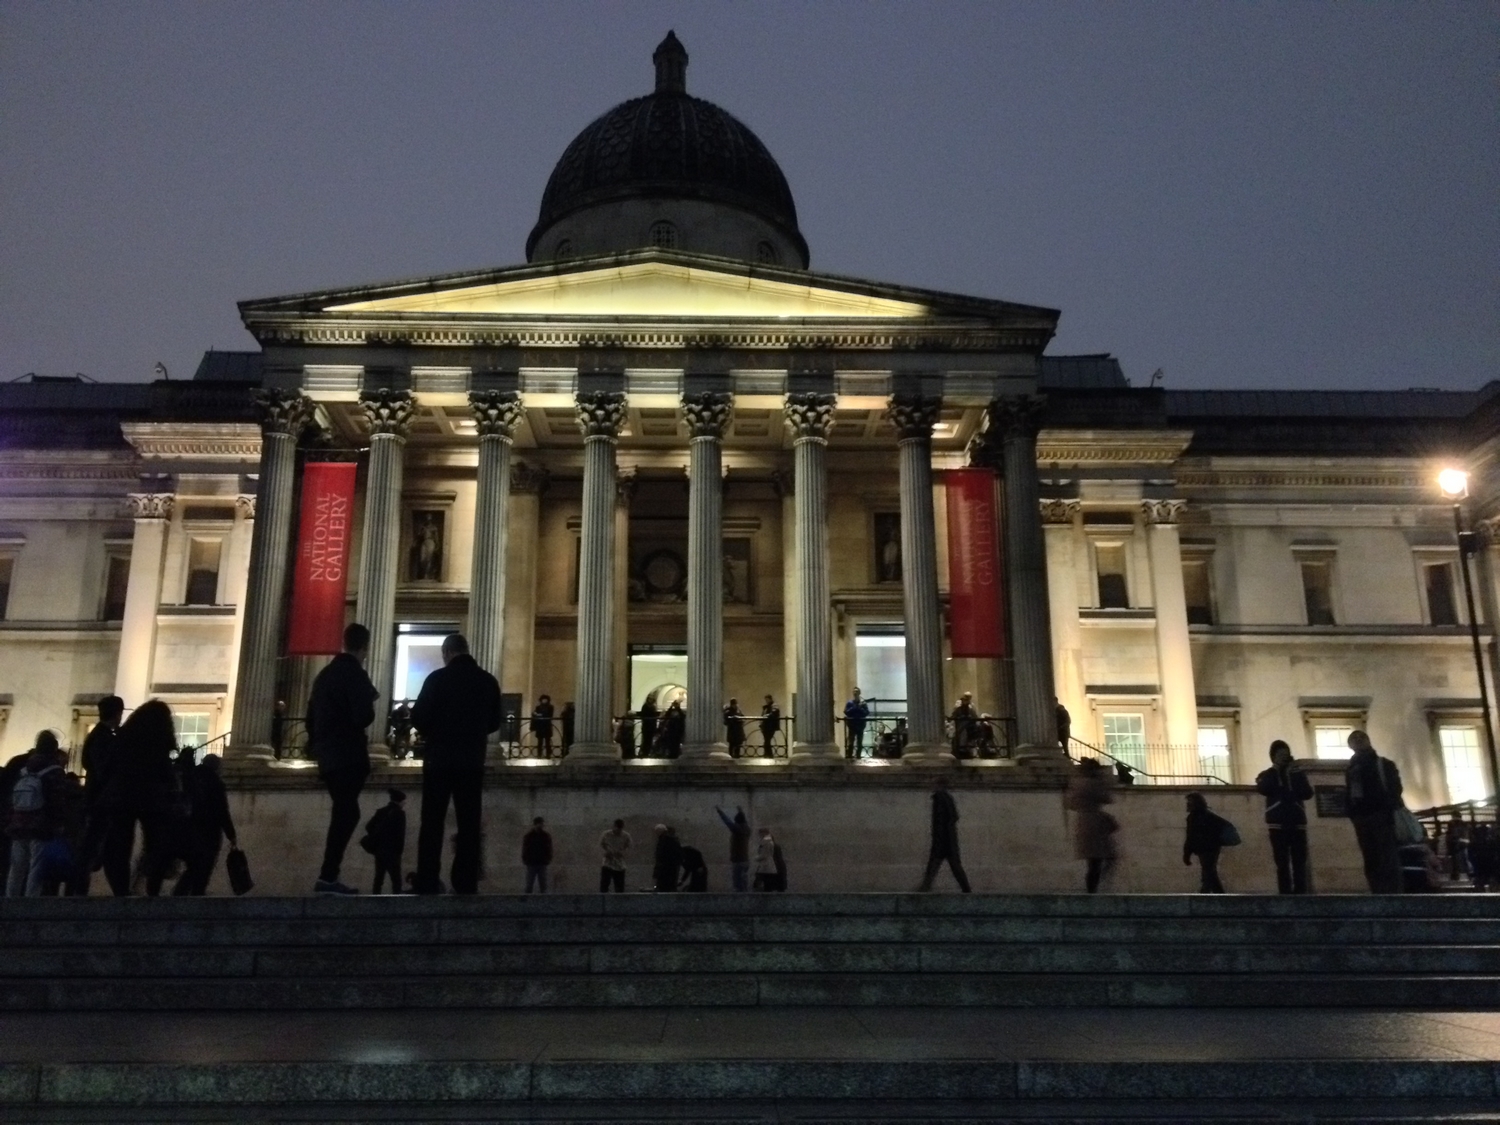 The National Gallery - London, England